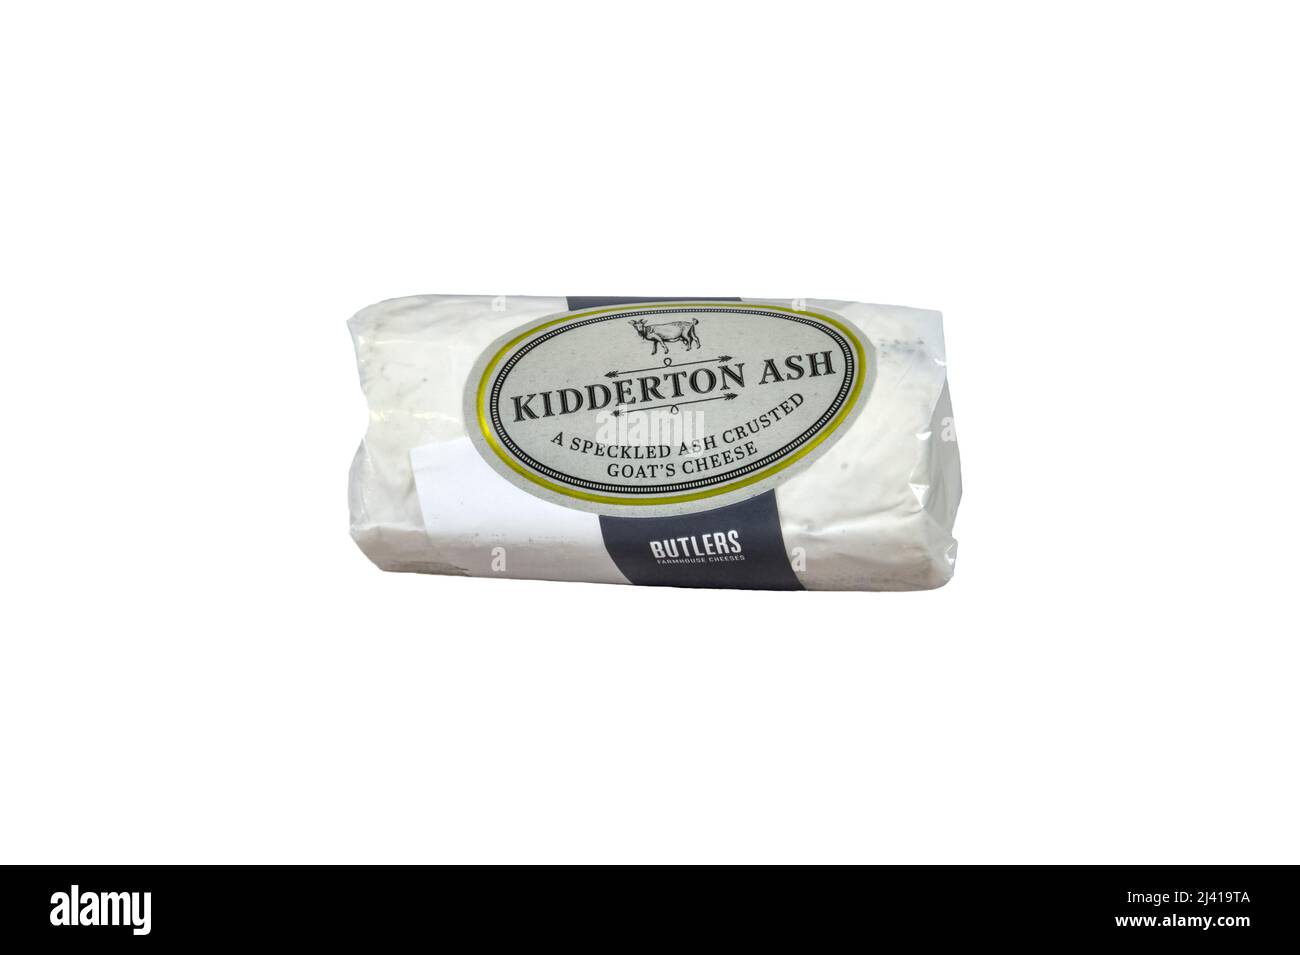 Kidderton Ash speckled ash crusted goat's cheese is made by Butlers Farmhouse Cheeses in Lancashire. Stock Photo